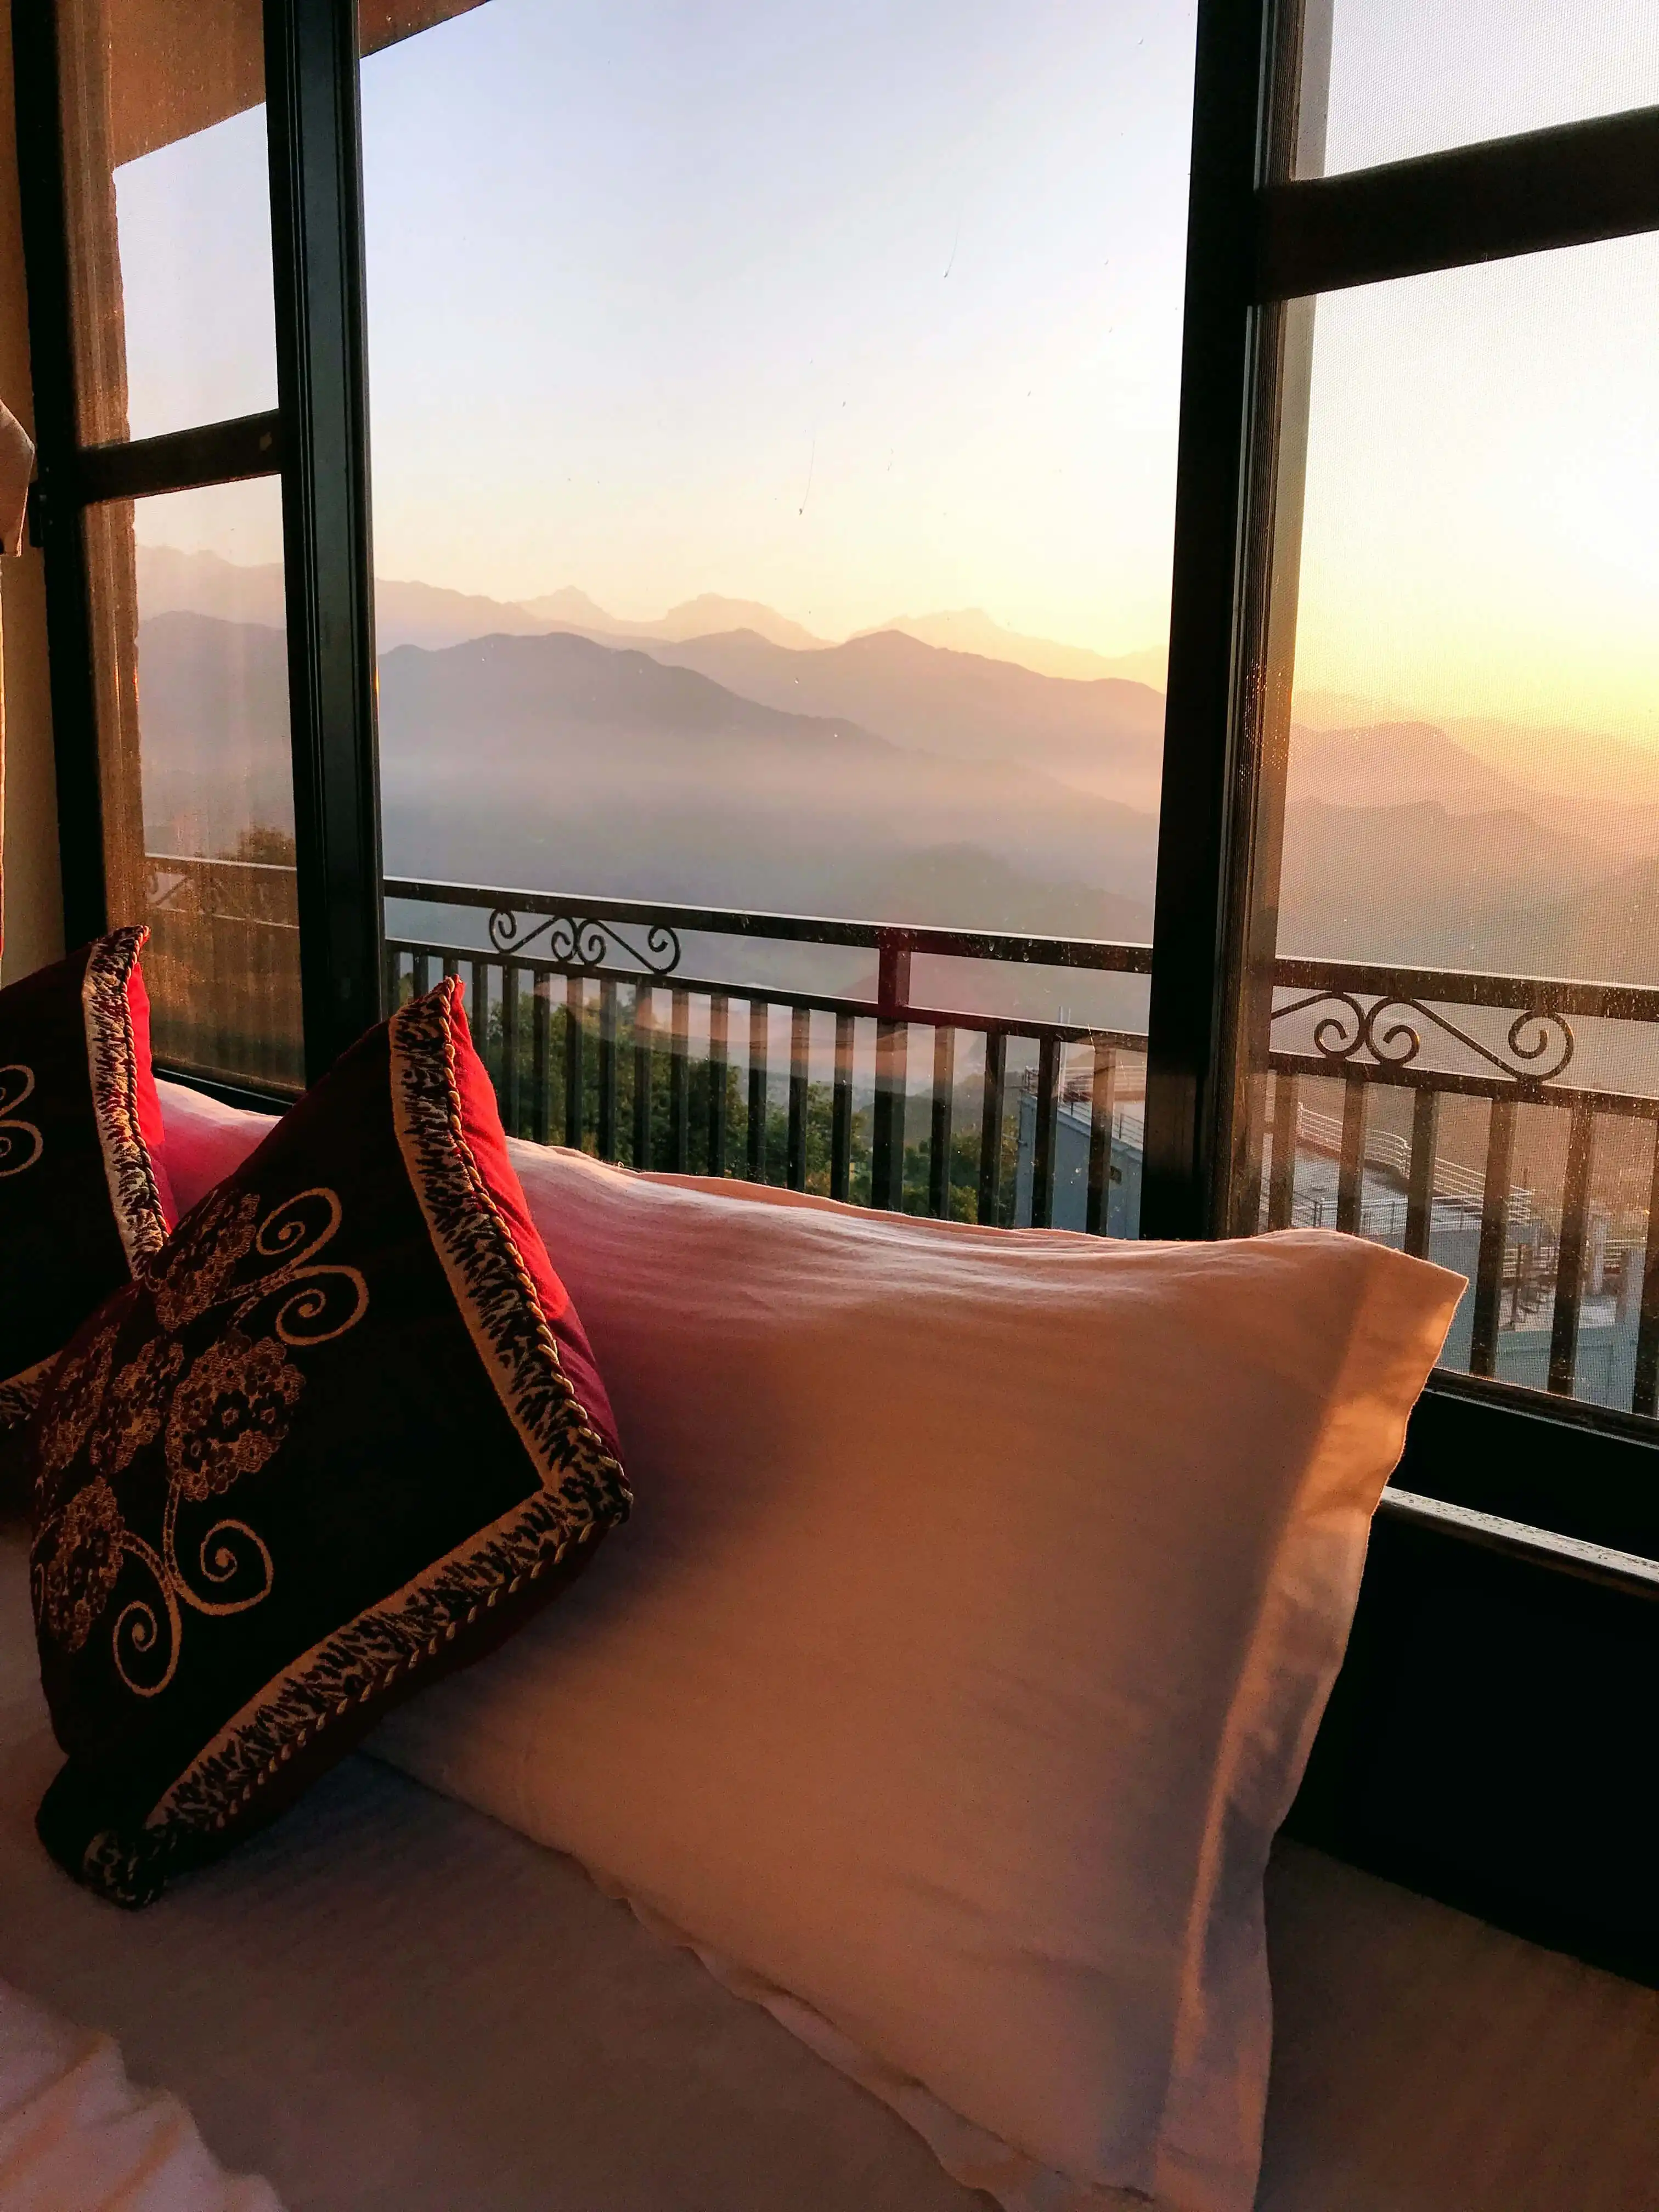 Bed top golden with sun beams, mountains seen from large window beside bed